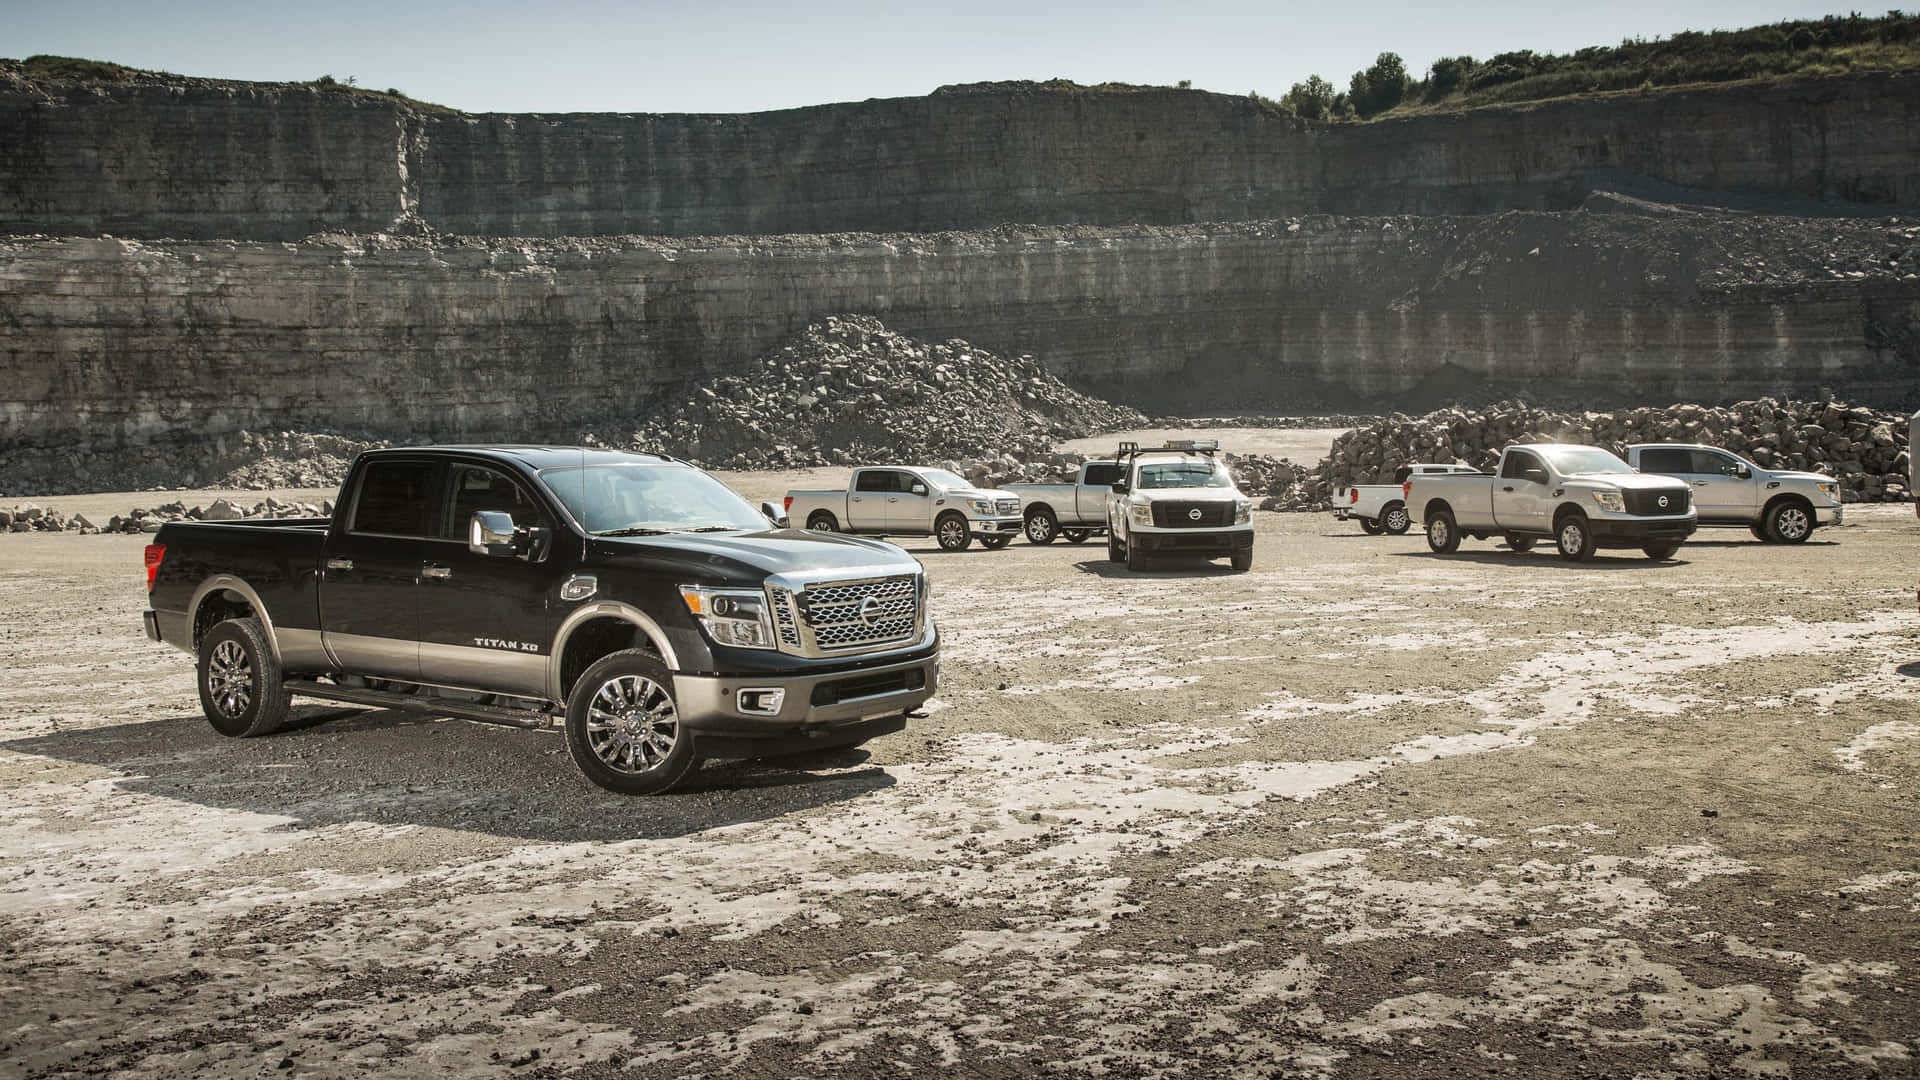 Majestic View Of The Powerful Nissan Titan Wallpaper